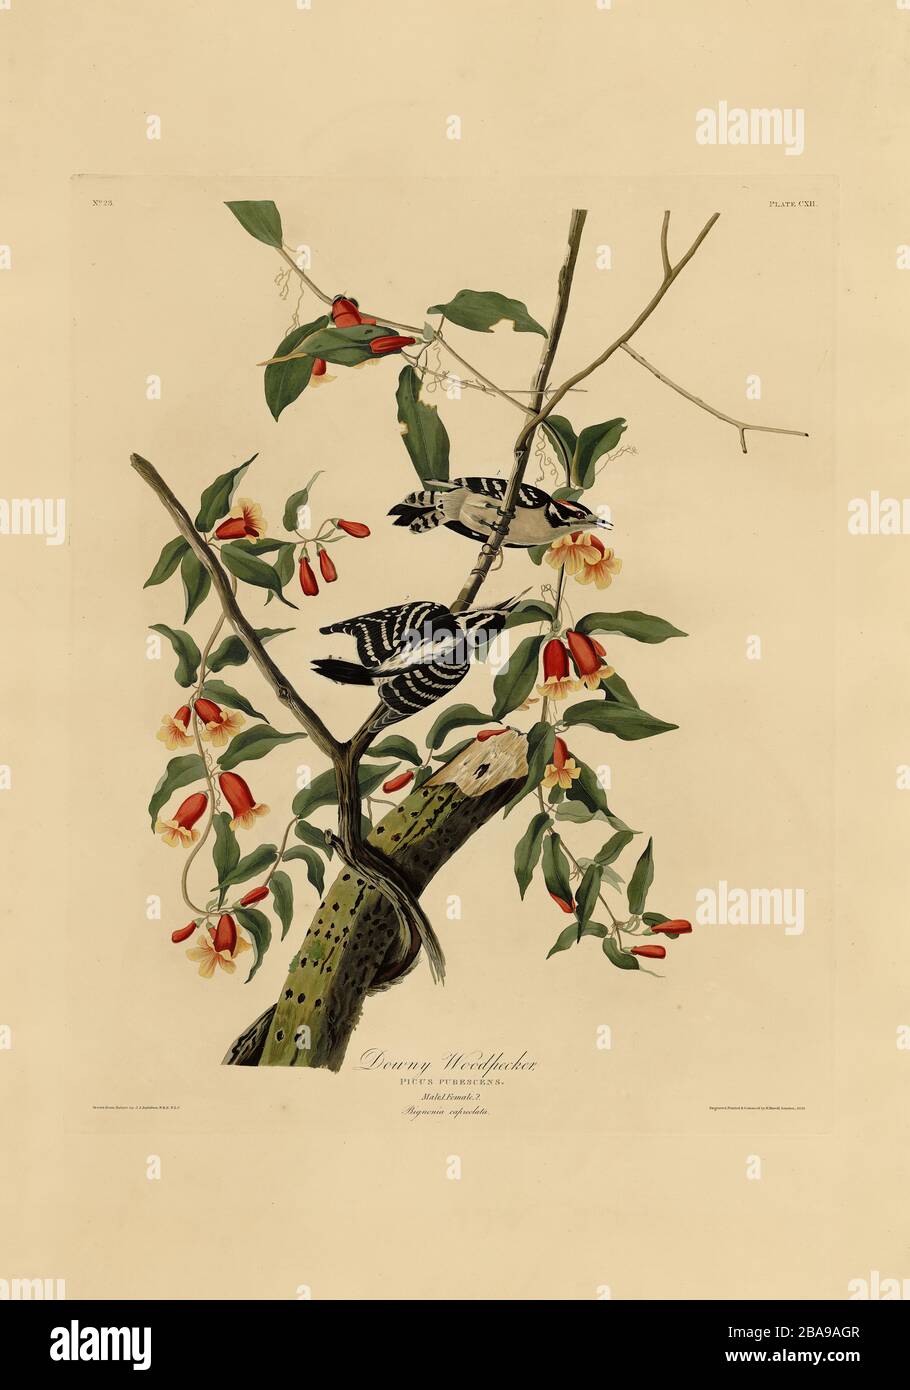 Plate 112 Downy Woodpecker from The Birds of America folio (1827–1839) by John James Audubon - Very high resolution and quality edited image Stock Photo